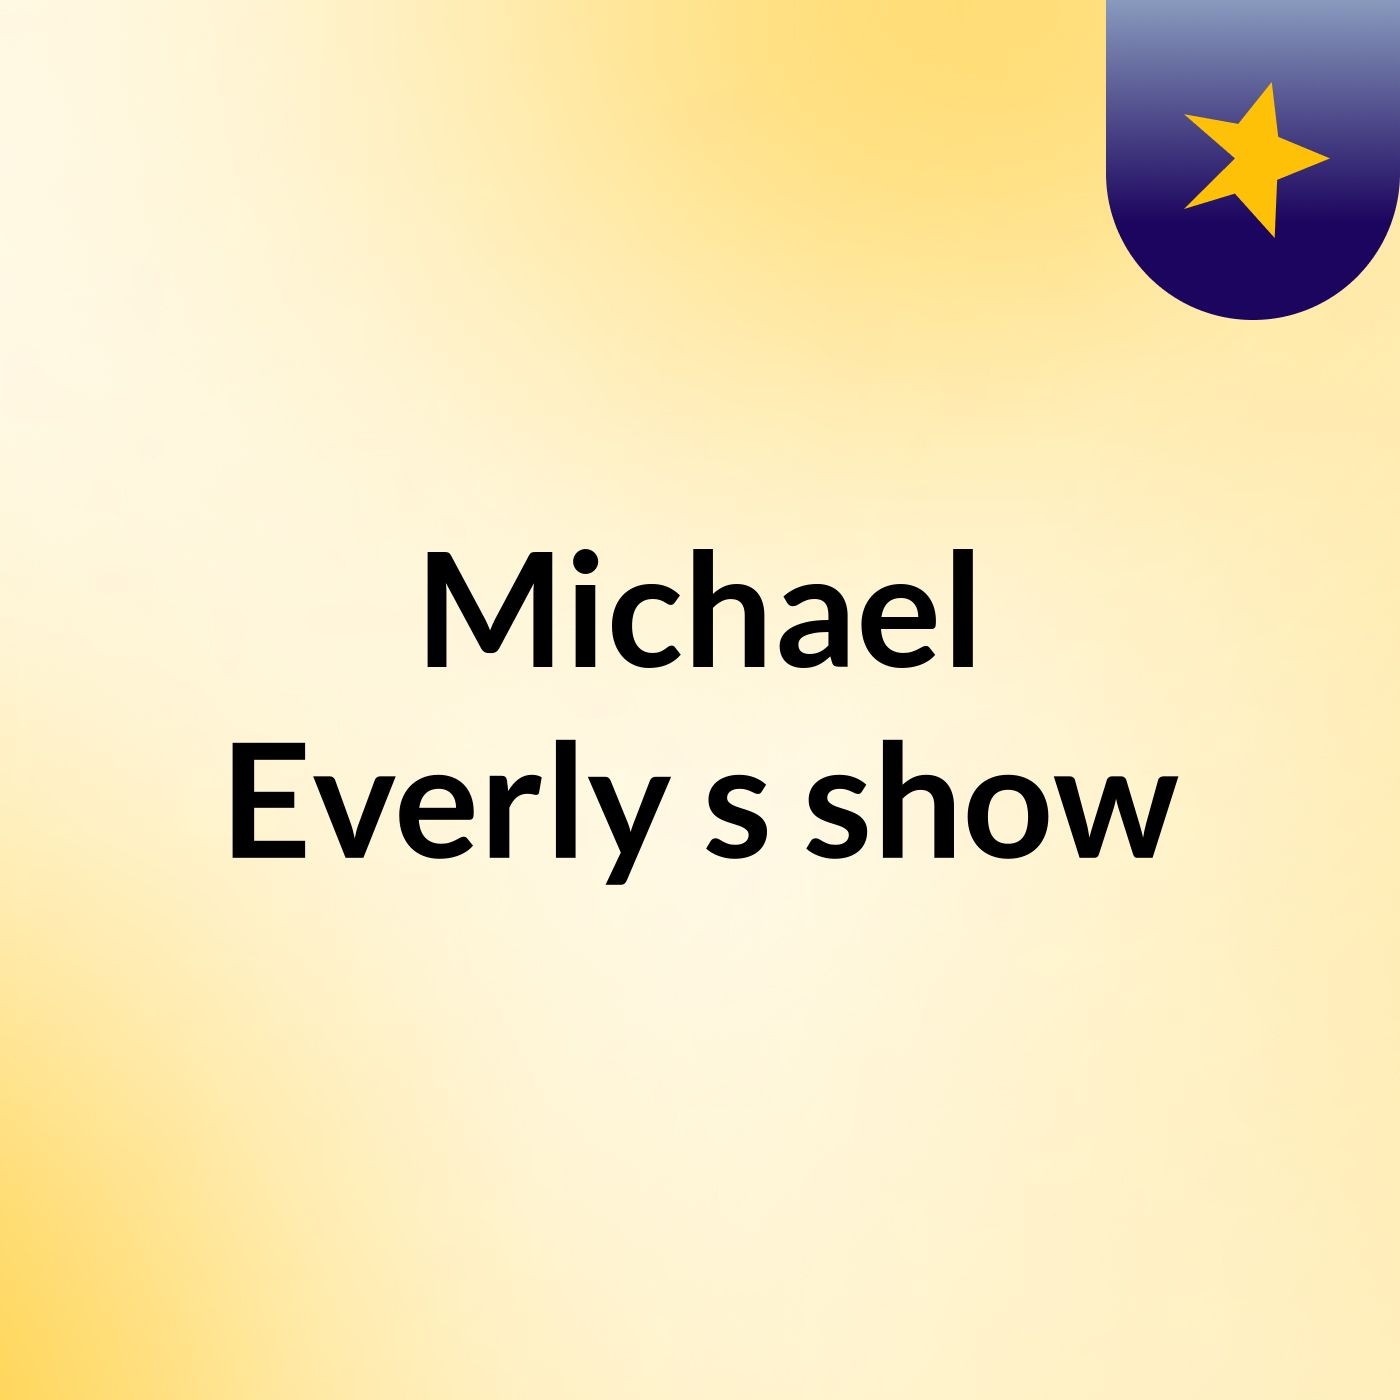 Episode 3 - Michael Everly's show